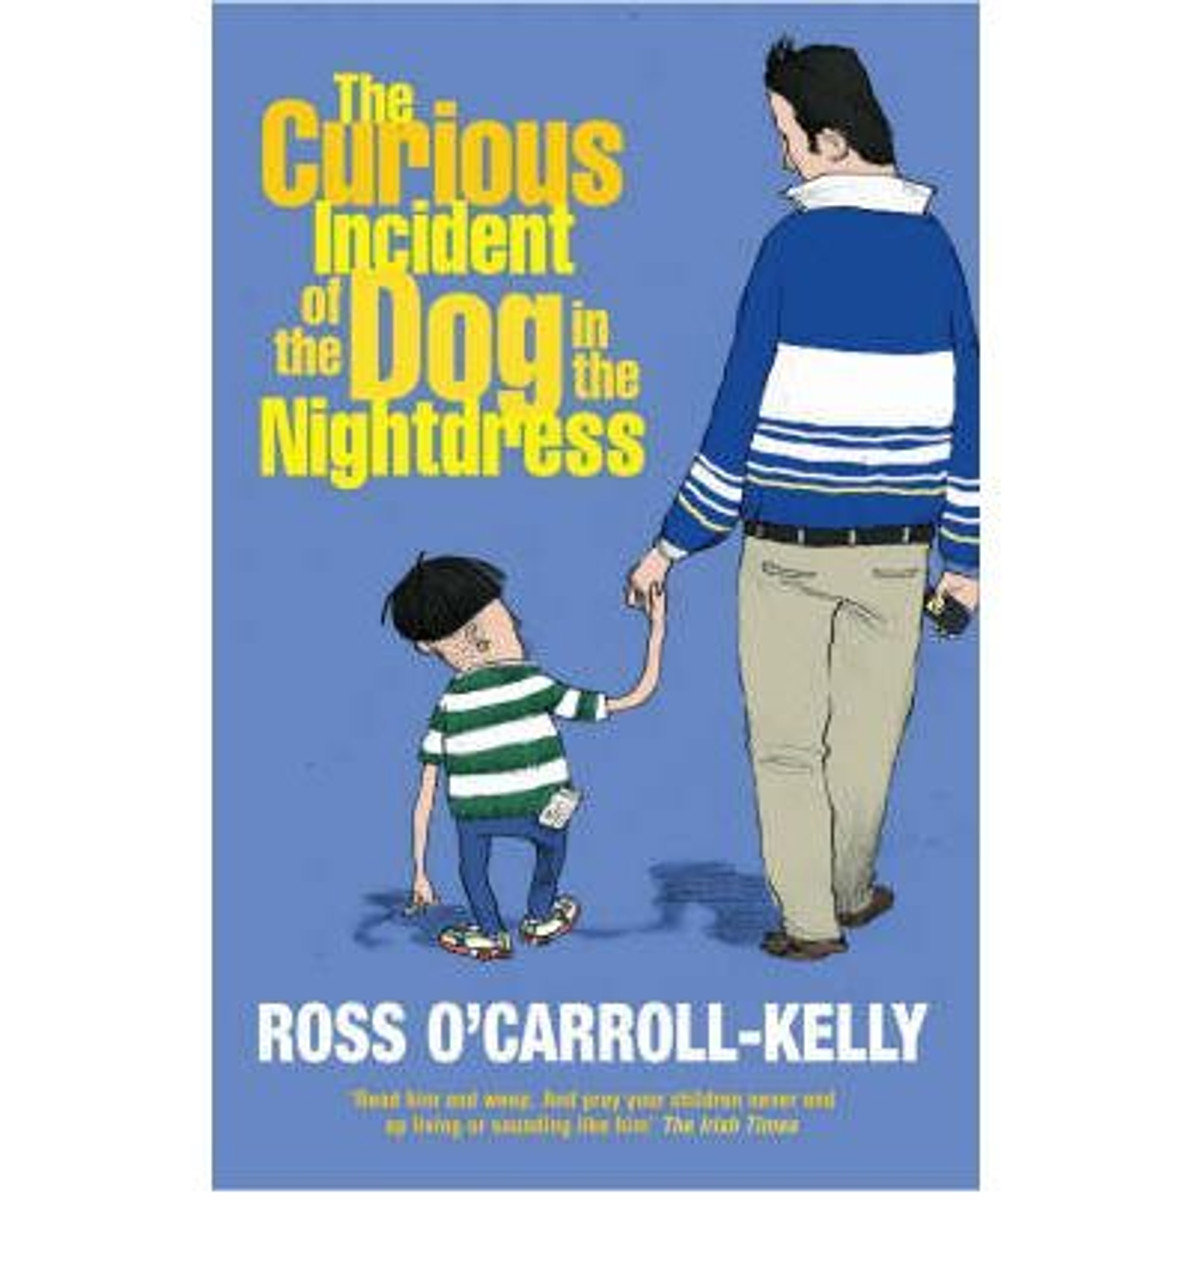 Ross O'Carroll-Kelly / The Curious Incident of the Dog in the Nightdress (Large Paperback)